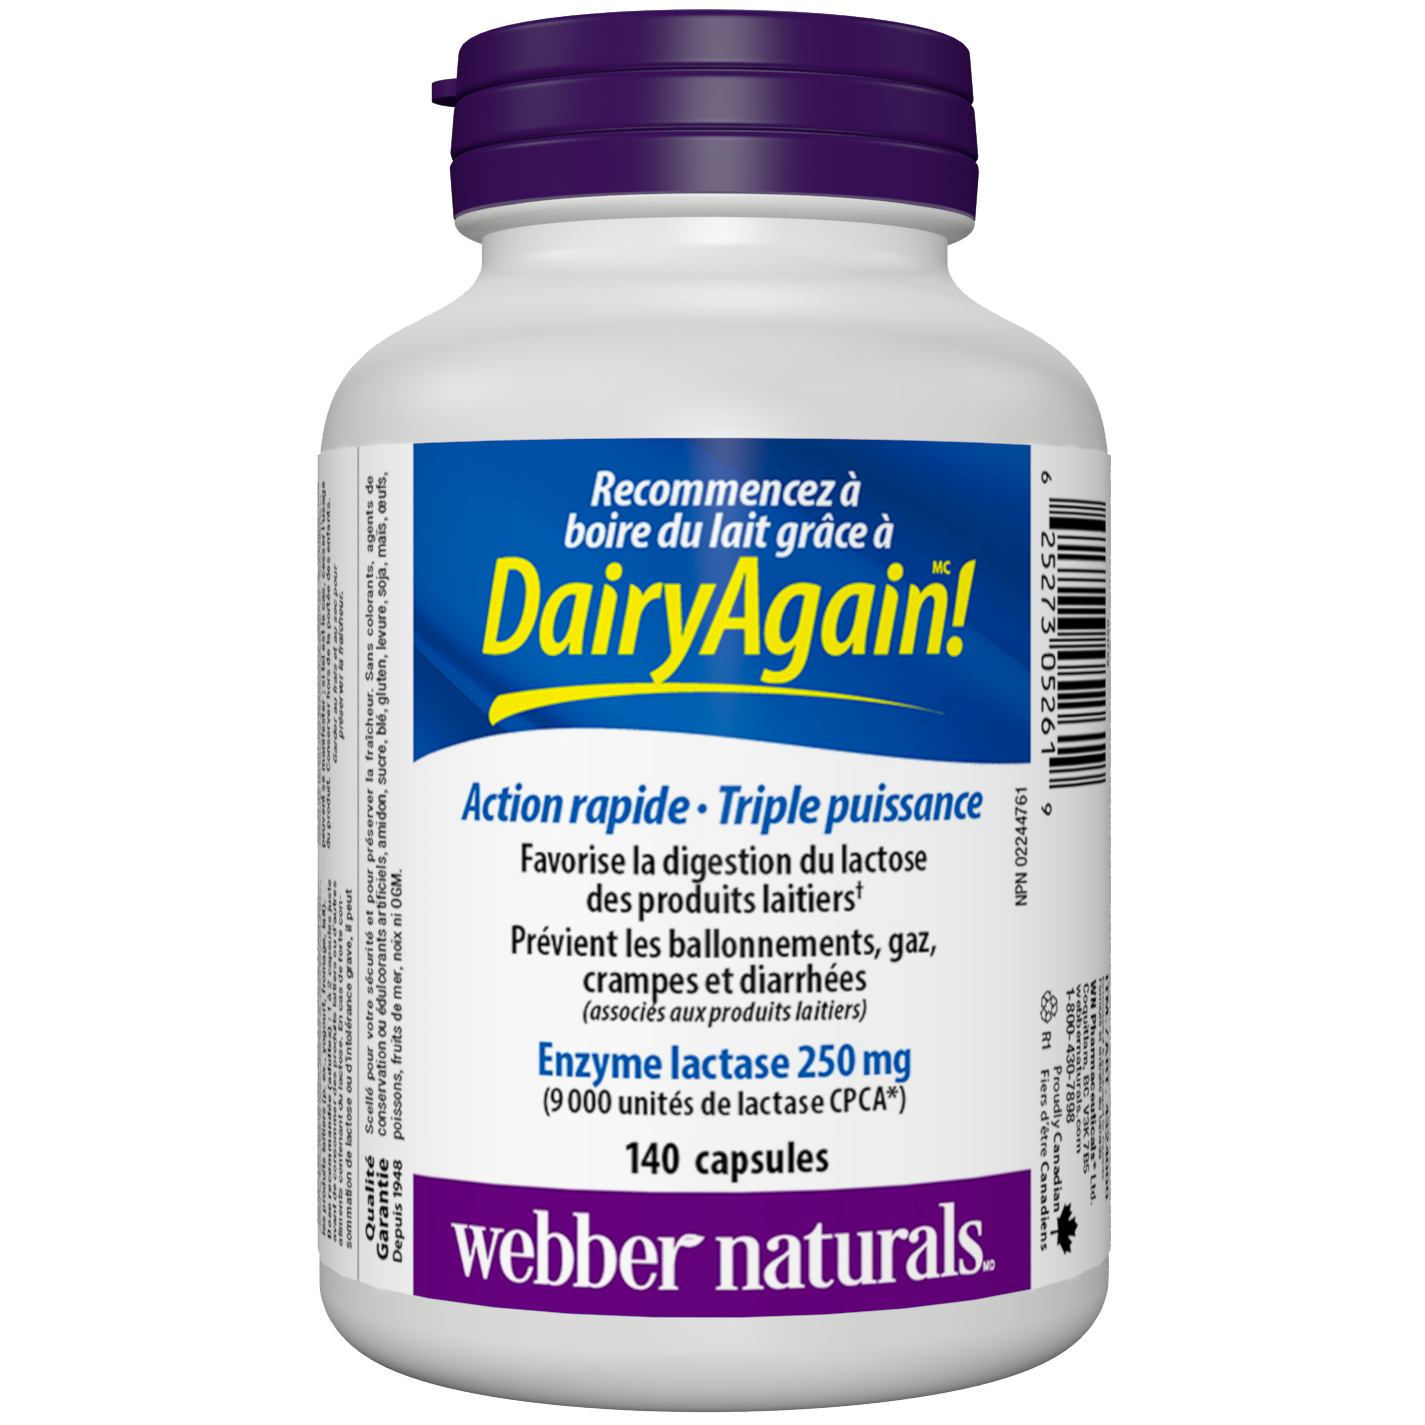 Dairy Again Enzyme Lactase Triple puissance 250 mg capsules for Webber Naturals|v|hi-res|WN5261